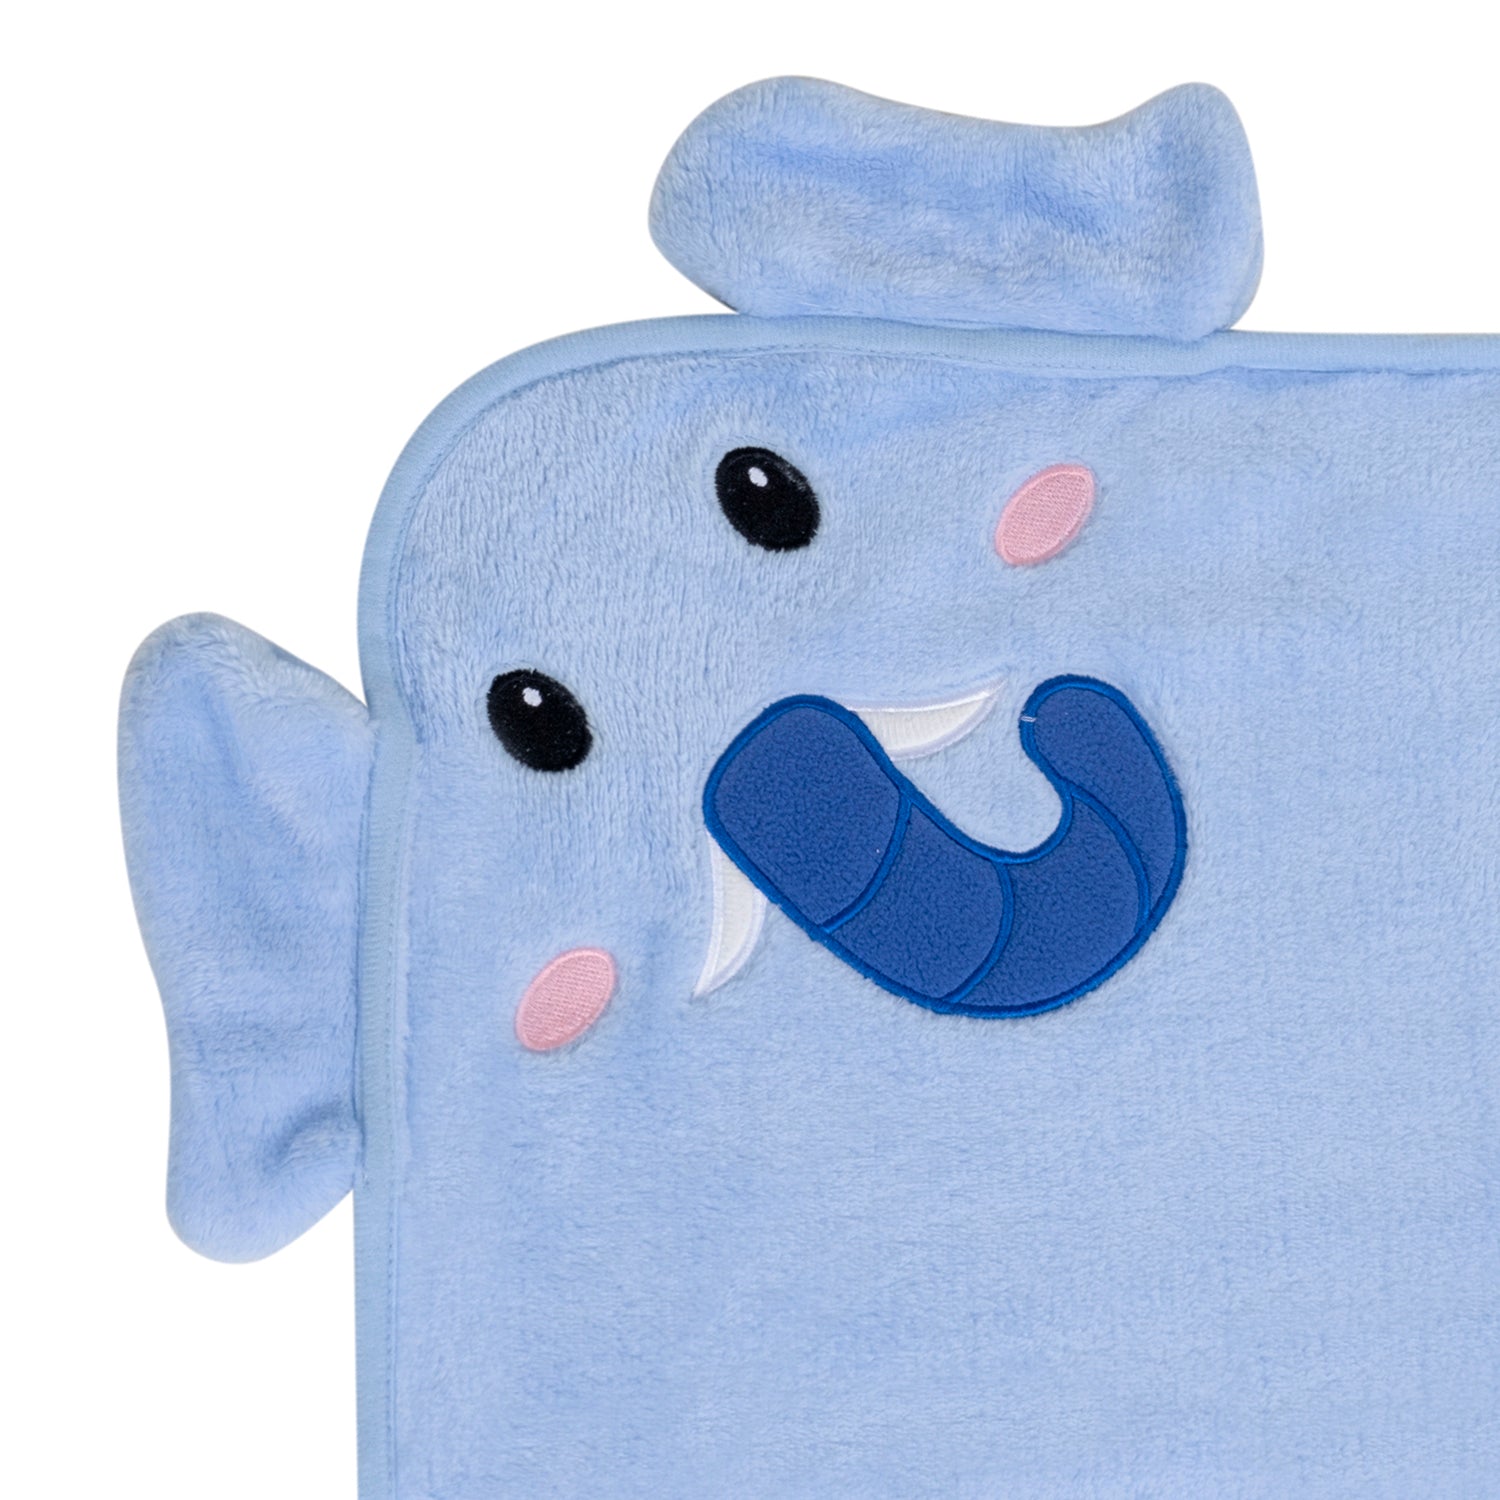 Baby Moo Elephant Applique with 3D Ears Soft Blanket - Blue